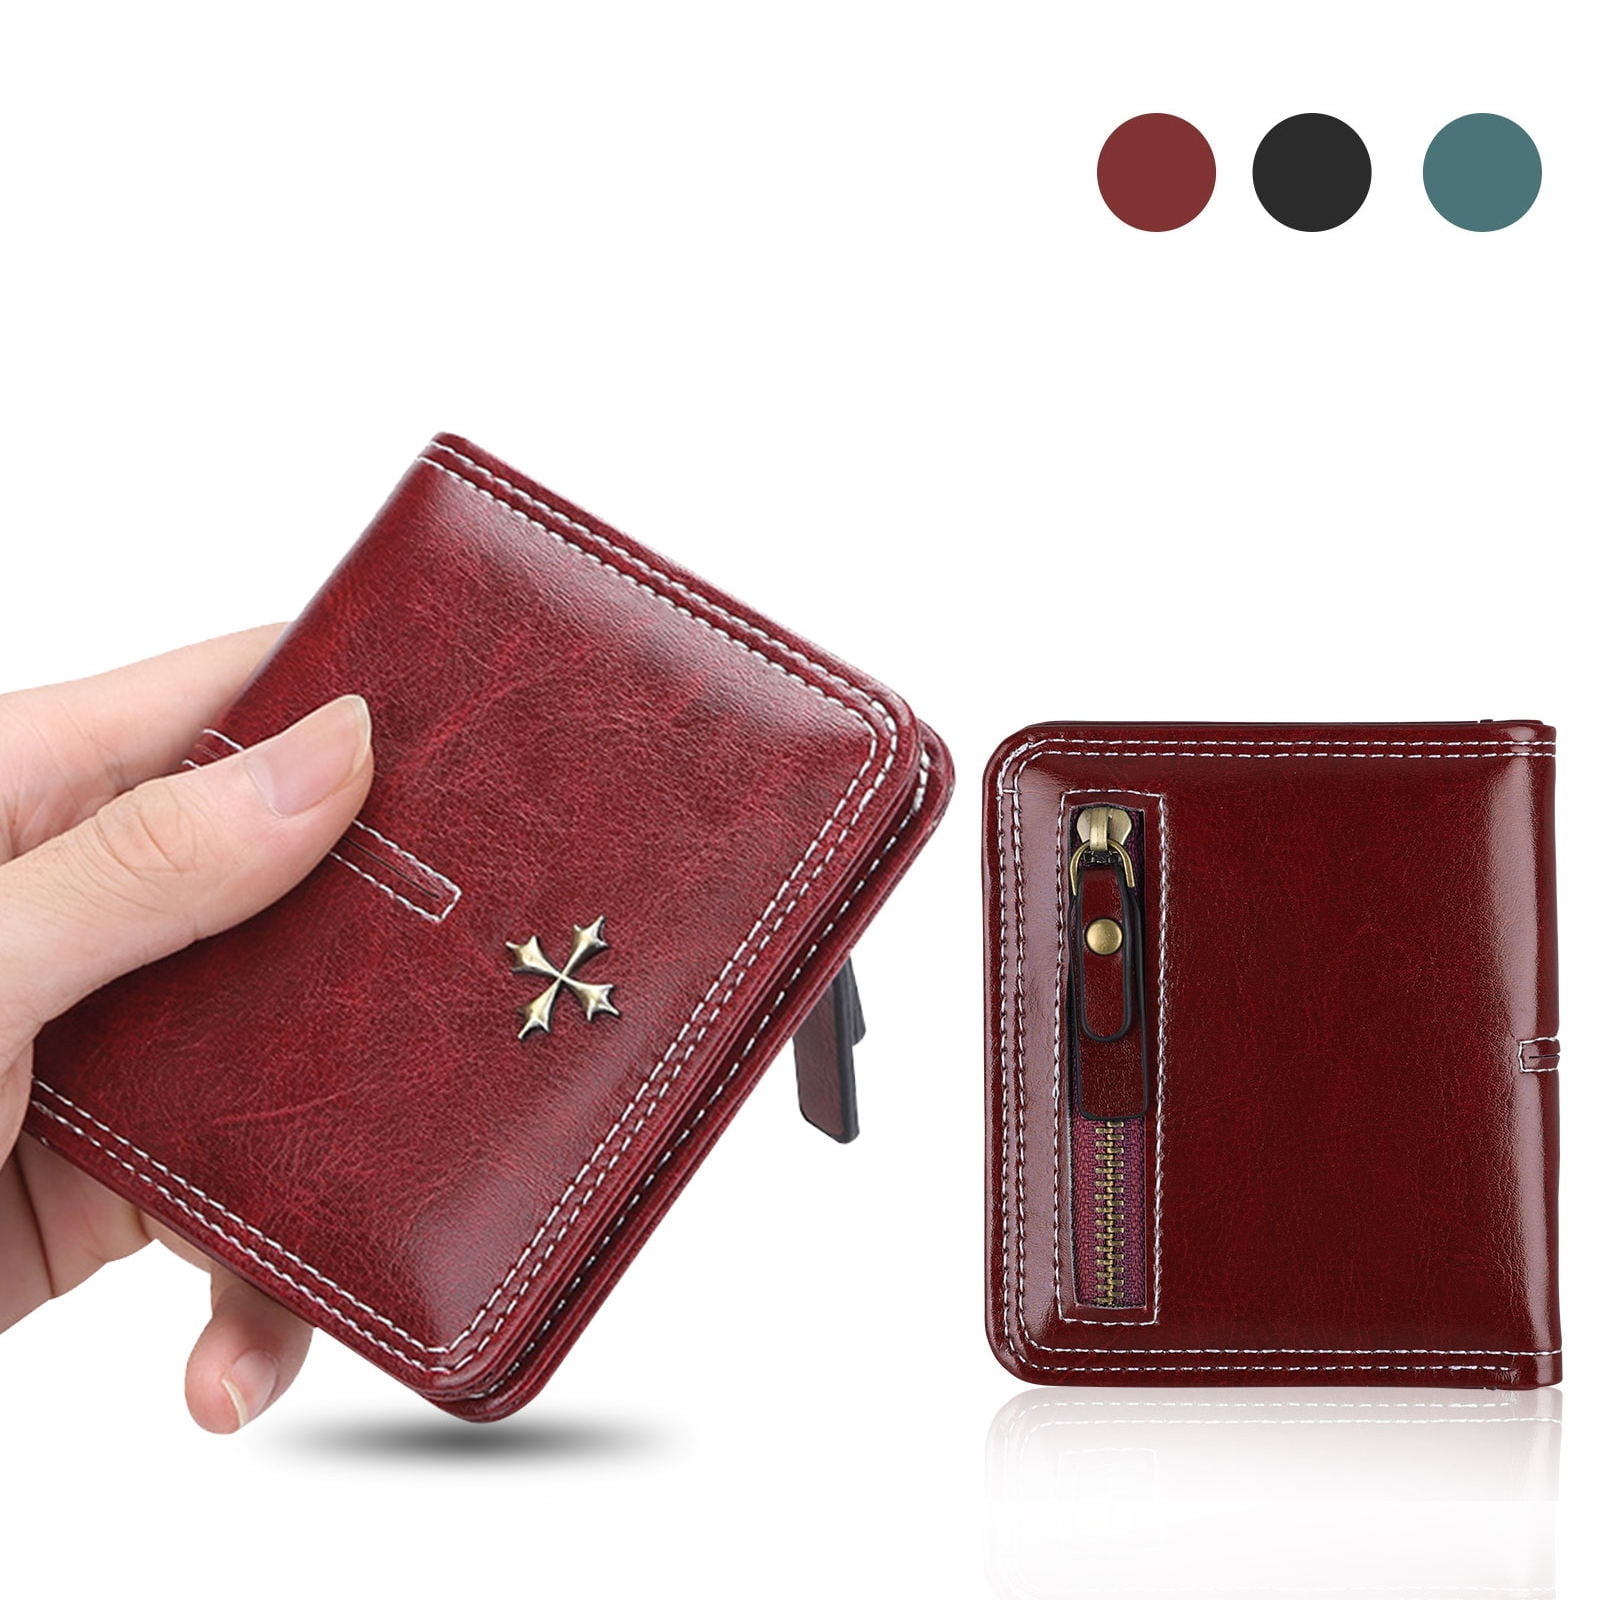 High Quality Women Genuine Leather Wallet Female Small Coin Purse Zipper  Wristlet Money Bags Ladies Pouch Card Holder Wallets